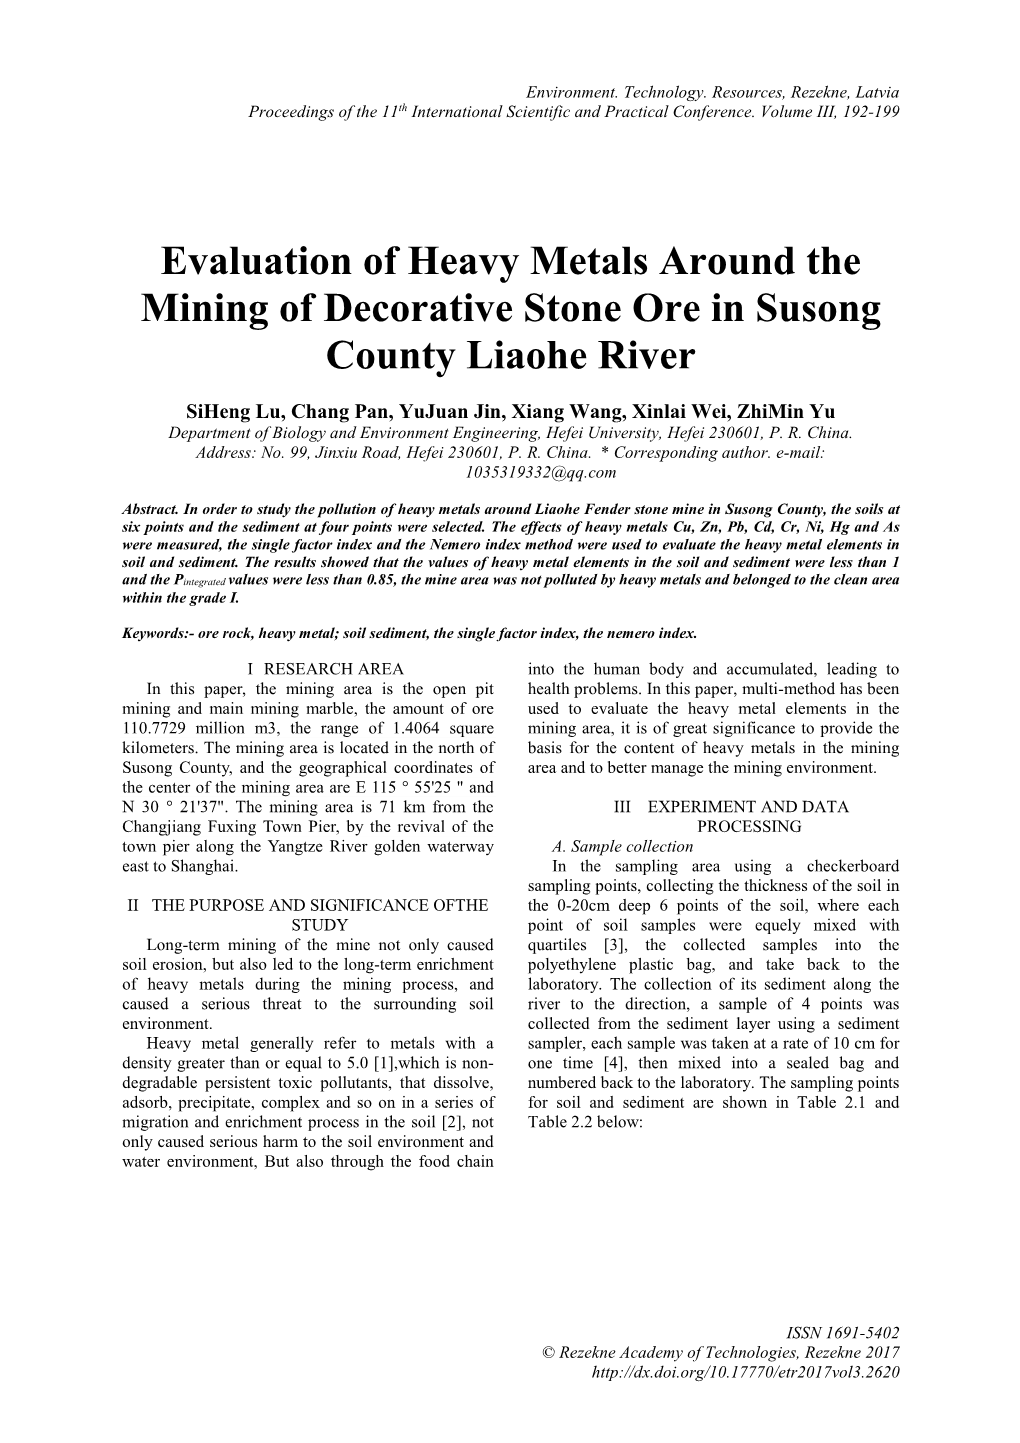 Evaluation of Heavy Metals Around the Mining of Decorative Stone Ore in Susong County Liaohe River